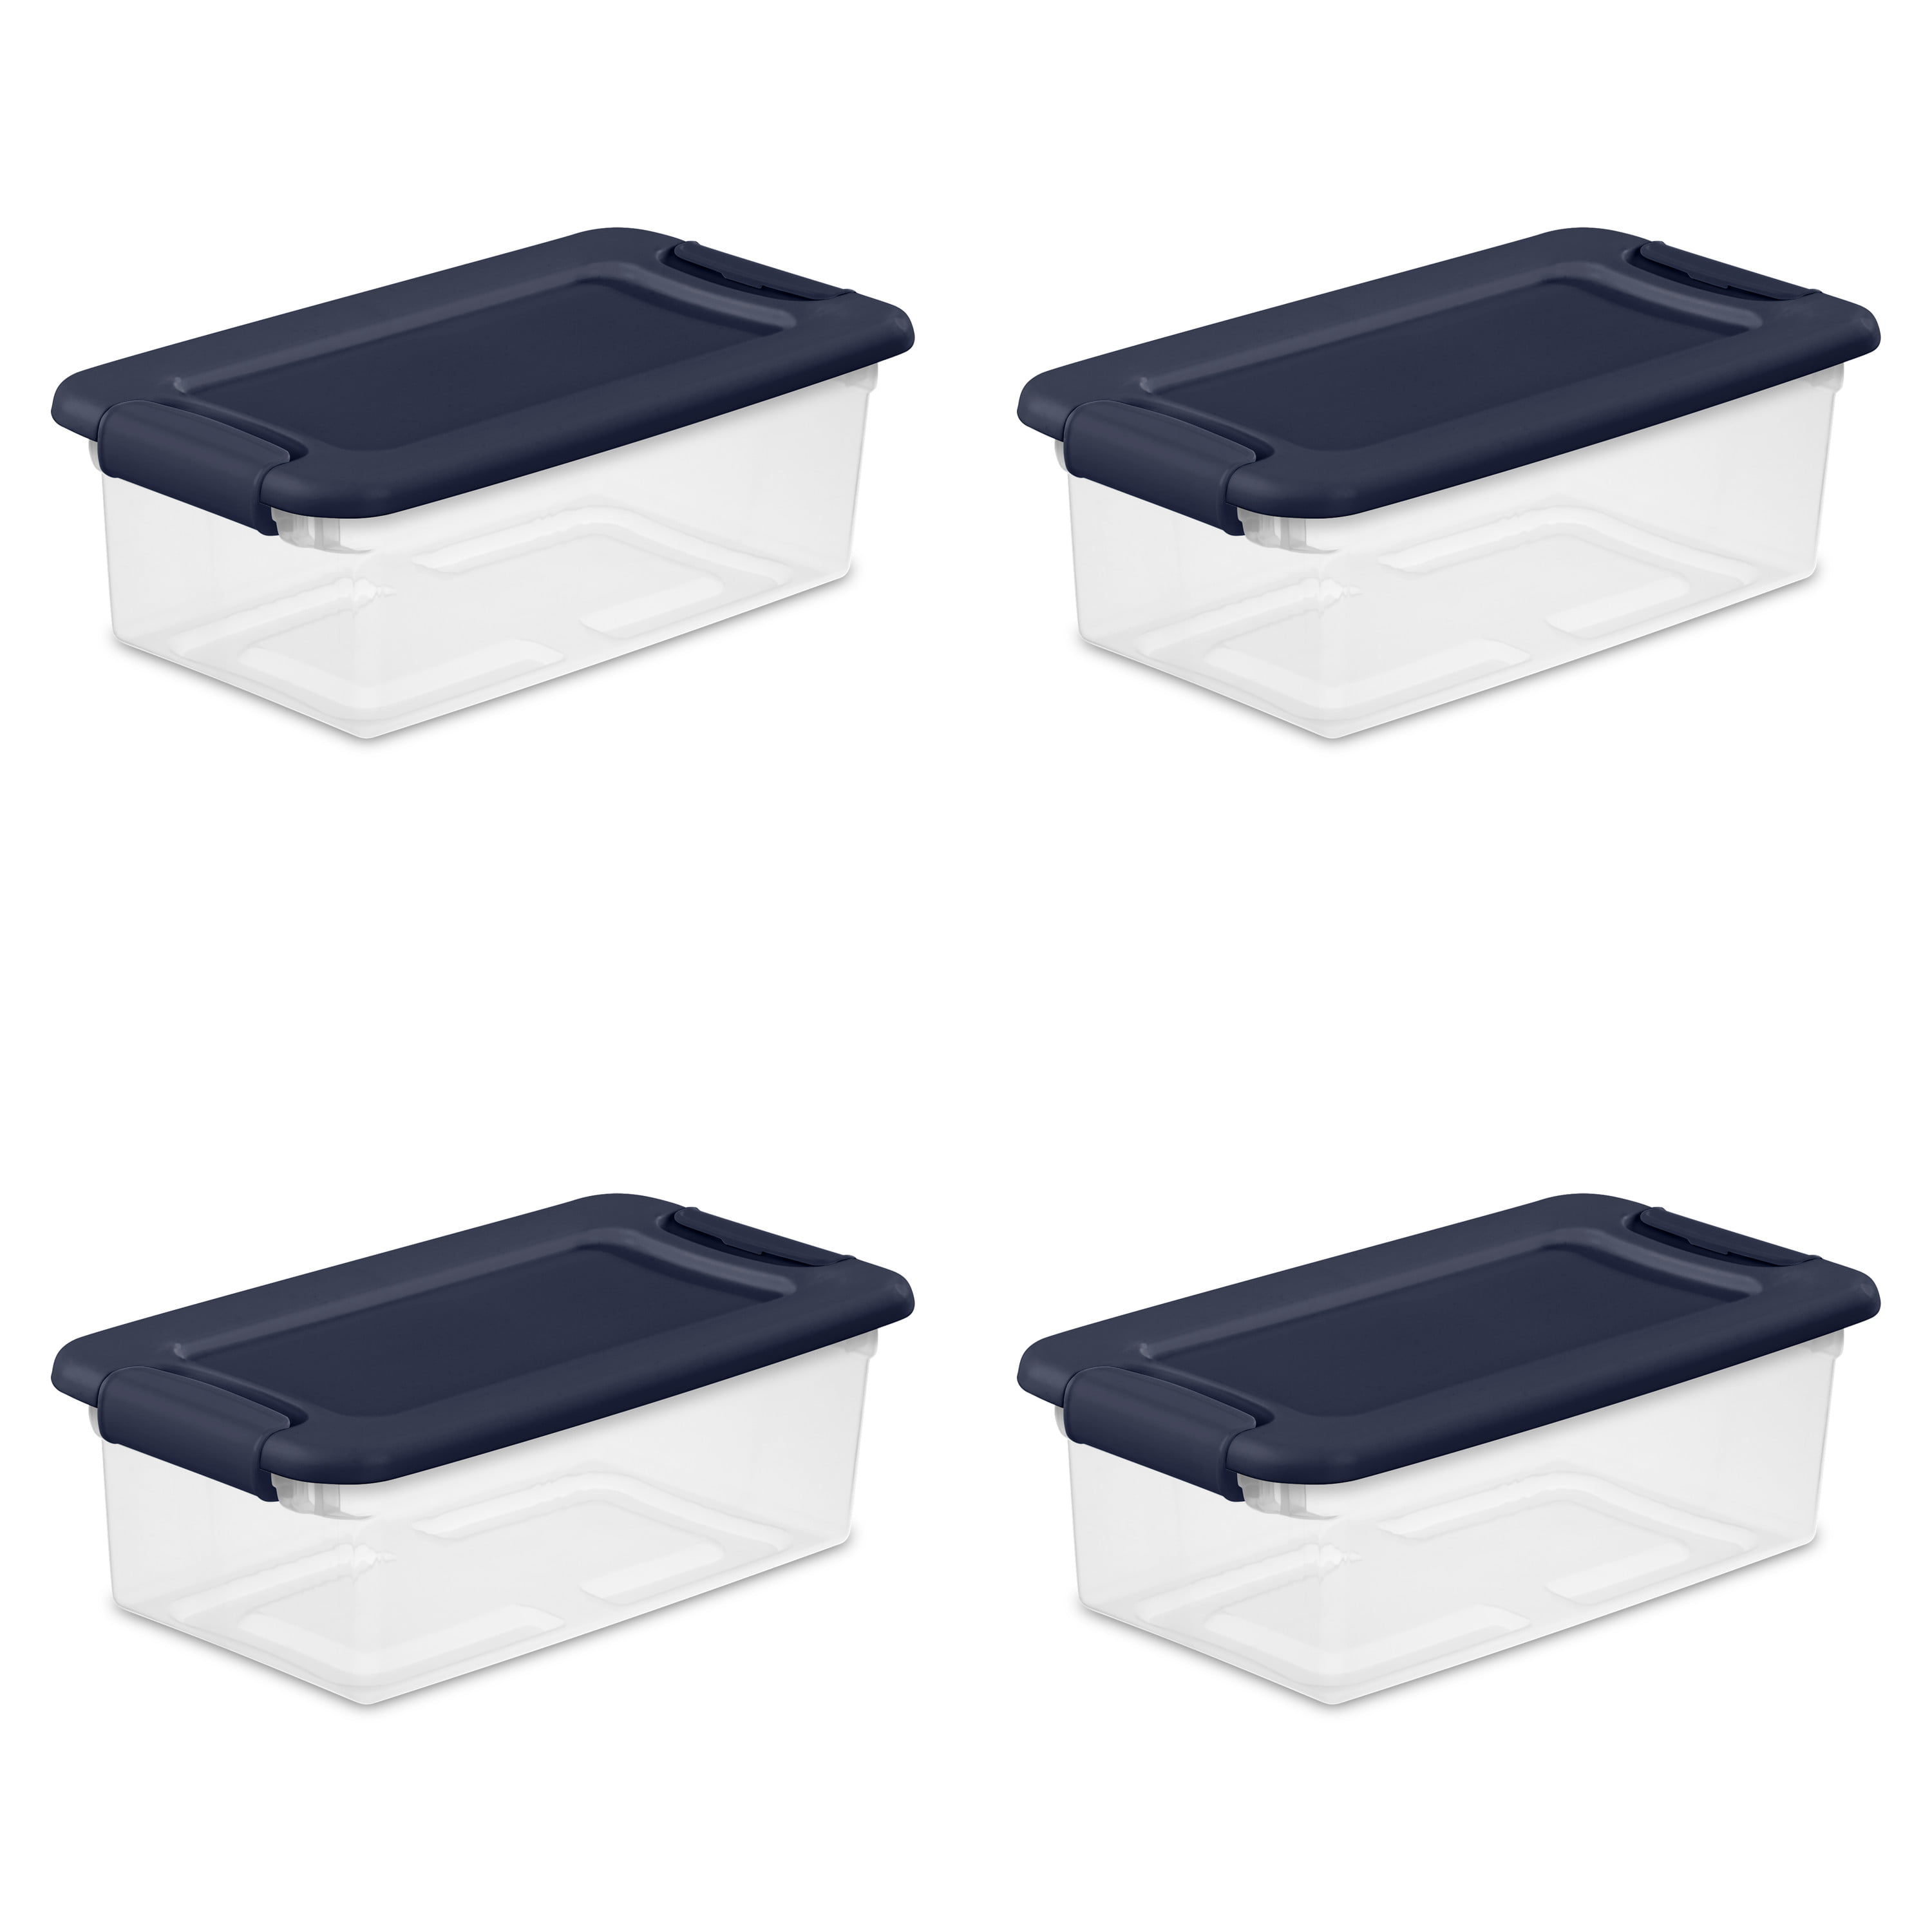 Homz 64 Qt Multipurpose Stackable Storage Bin with Latching Lids, Clear